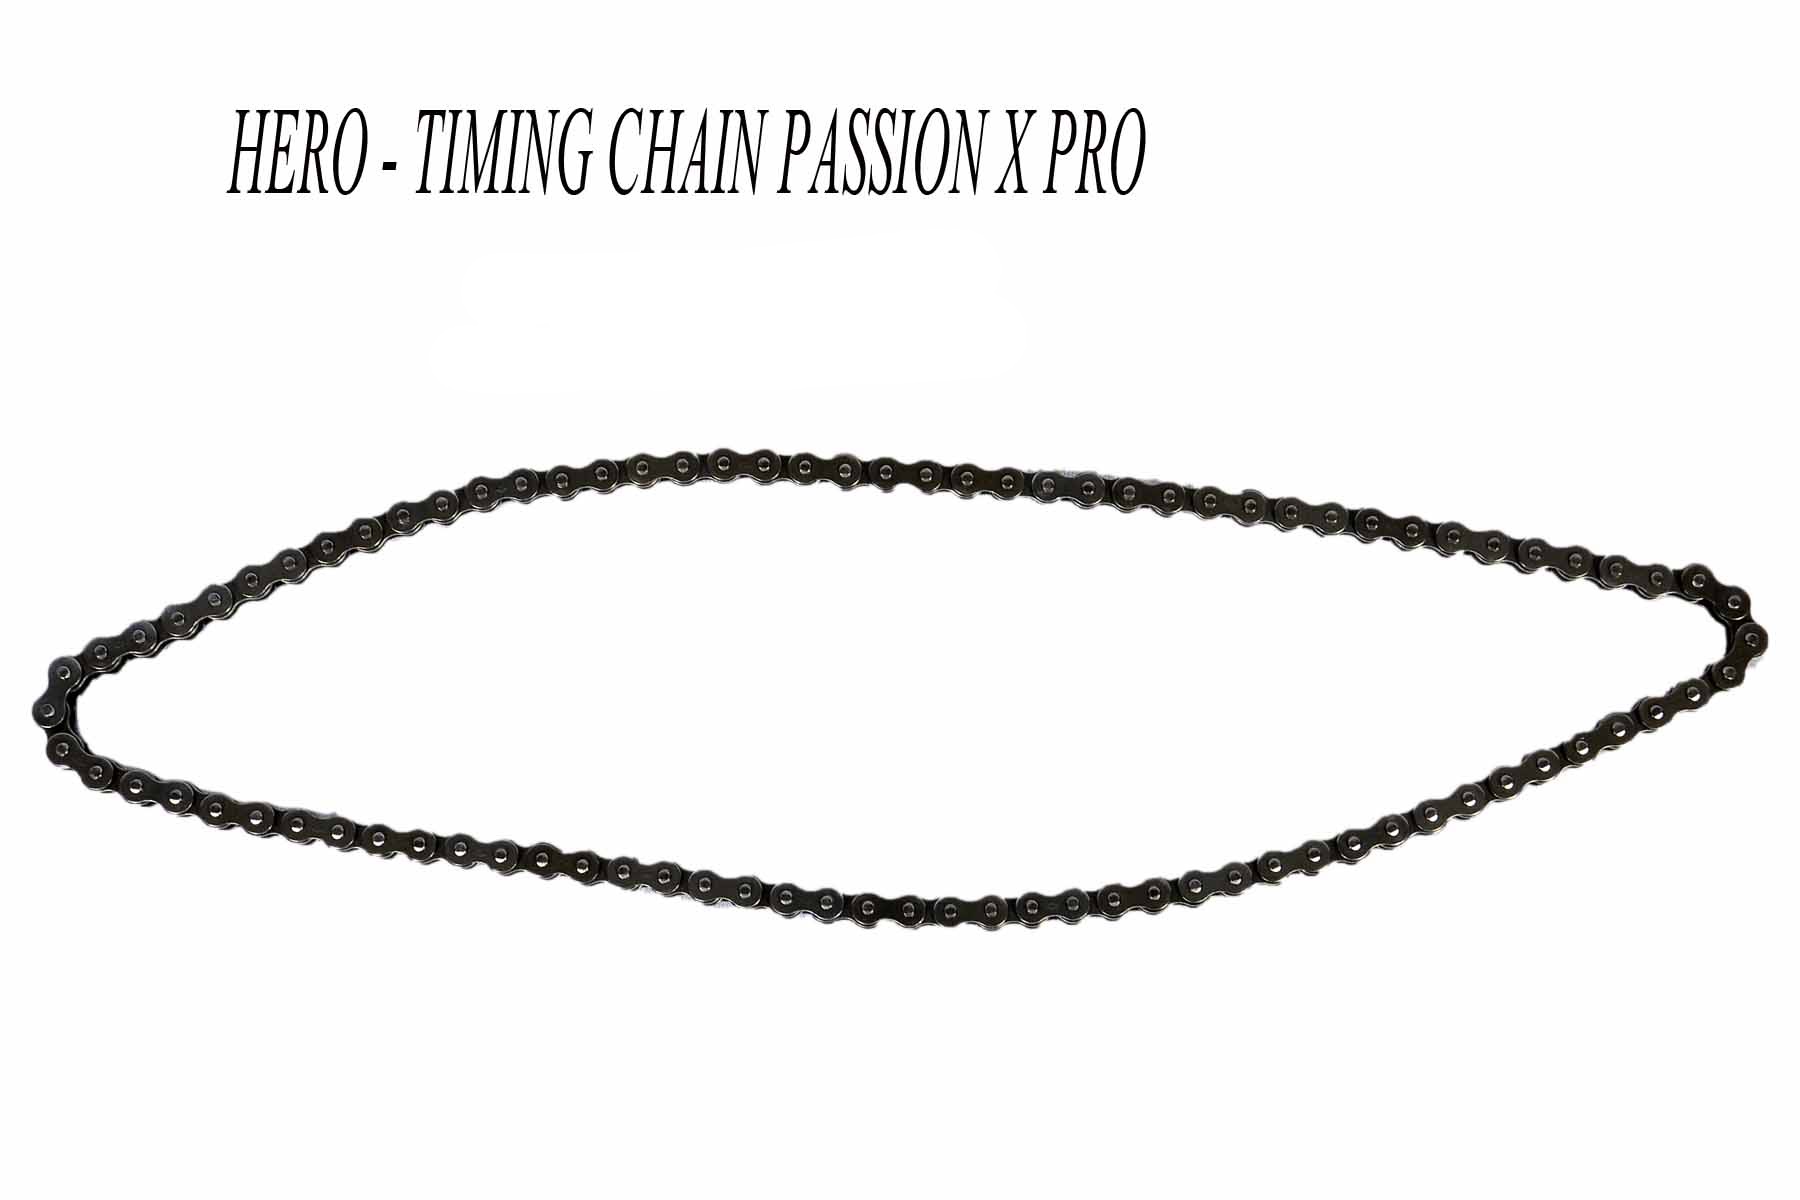 HERO TIMING CHAIN PASSION X PRO